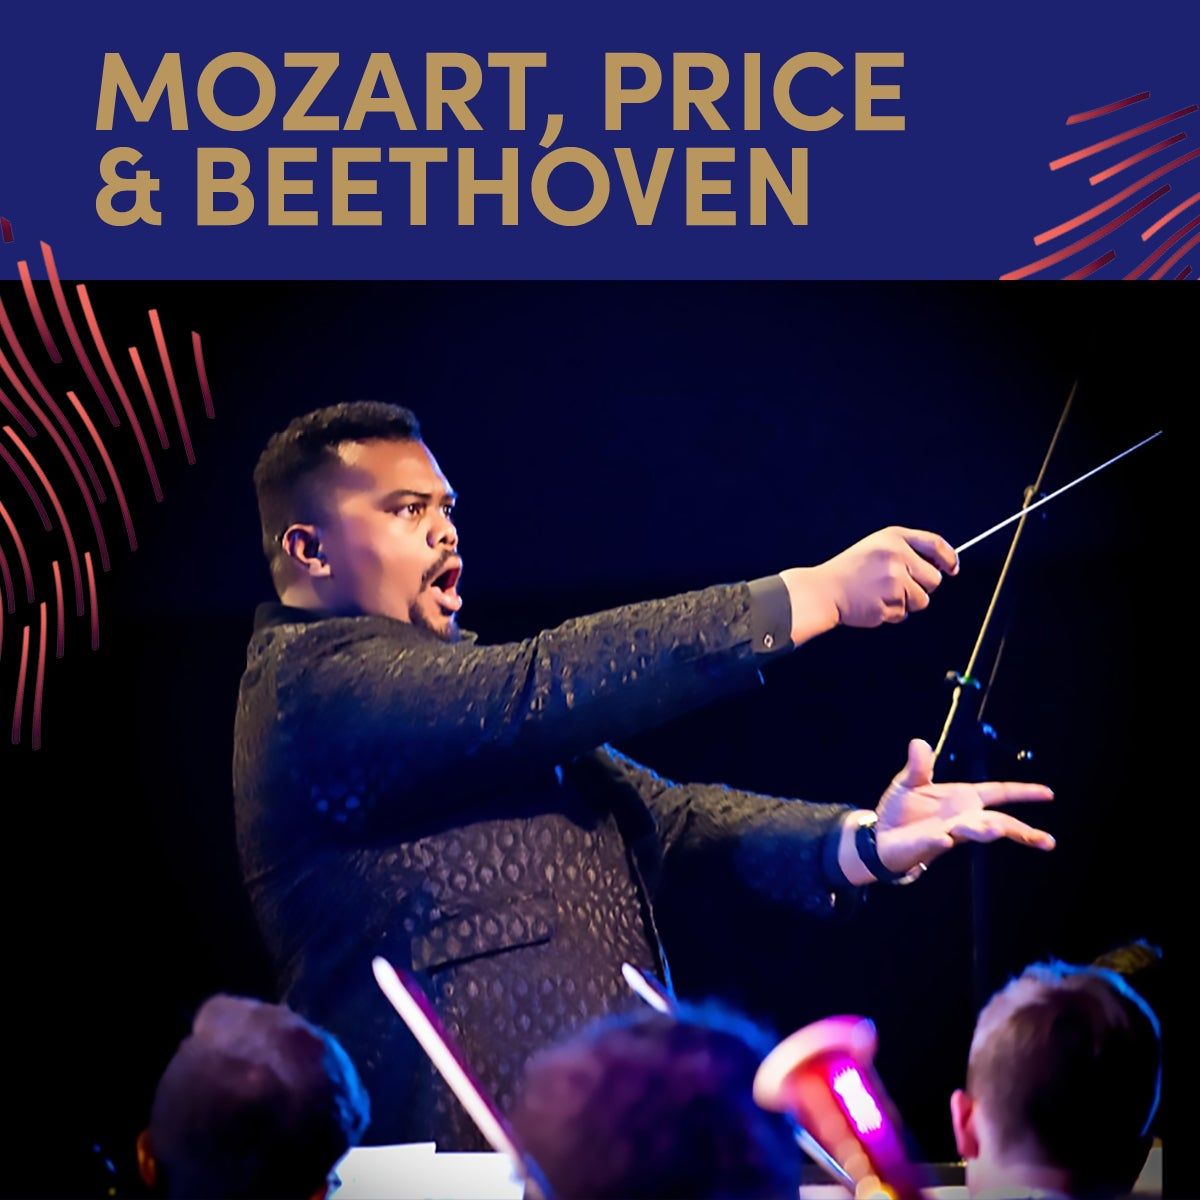 Richmond Symphony - Mozart, Price and Beethoven (Concert)